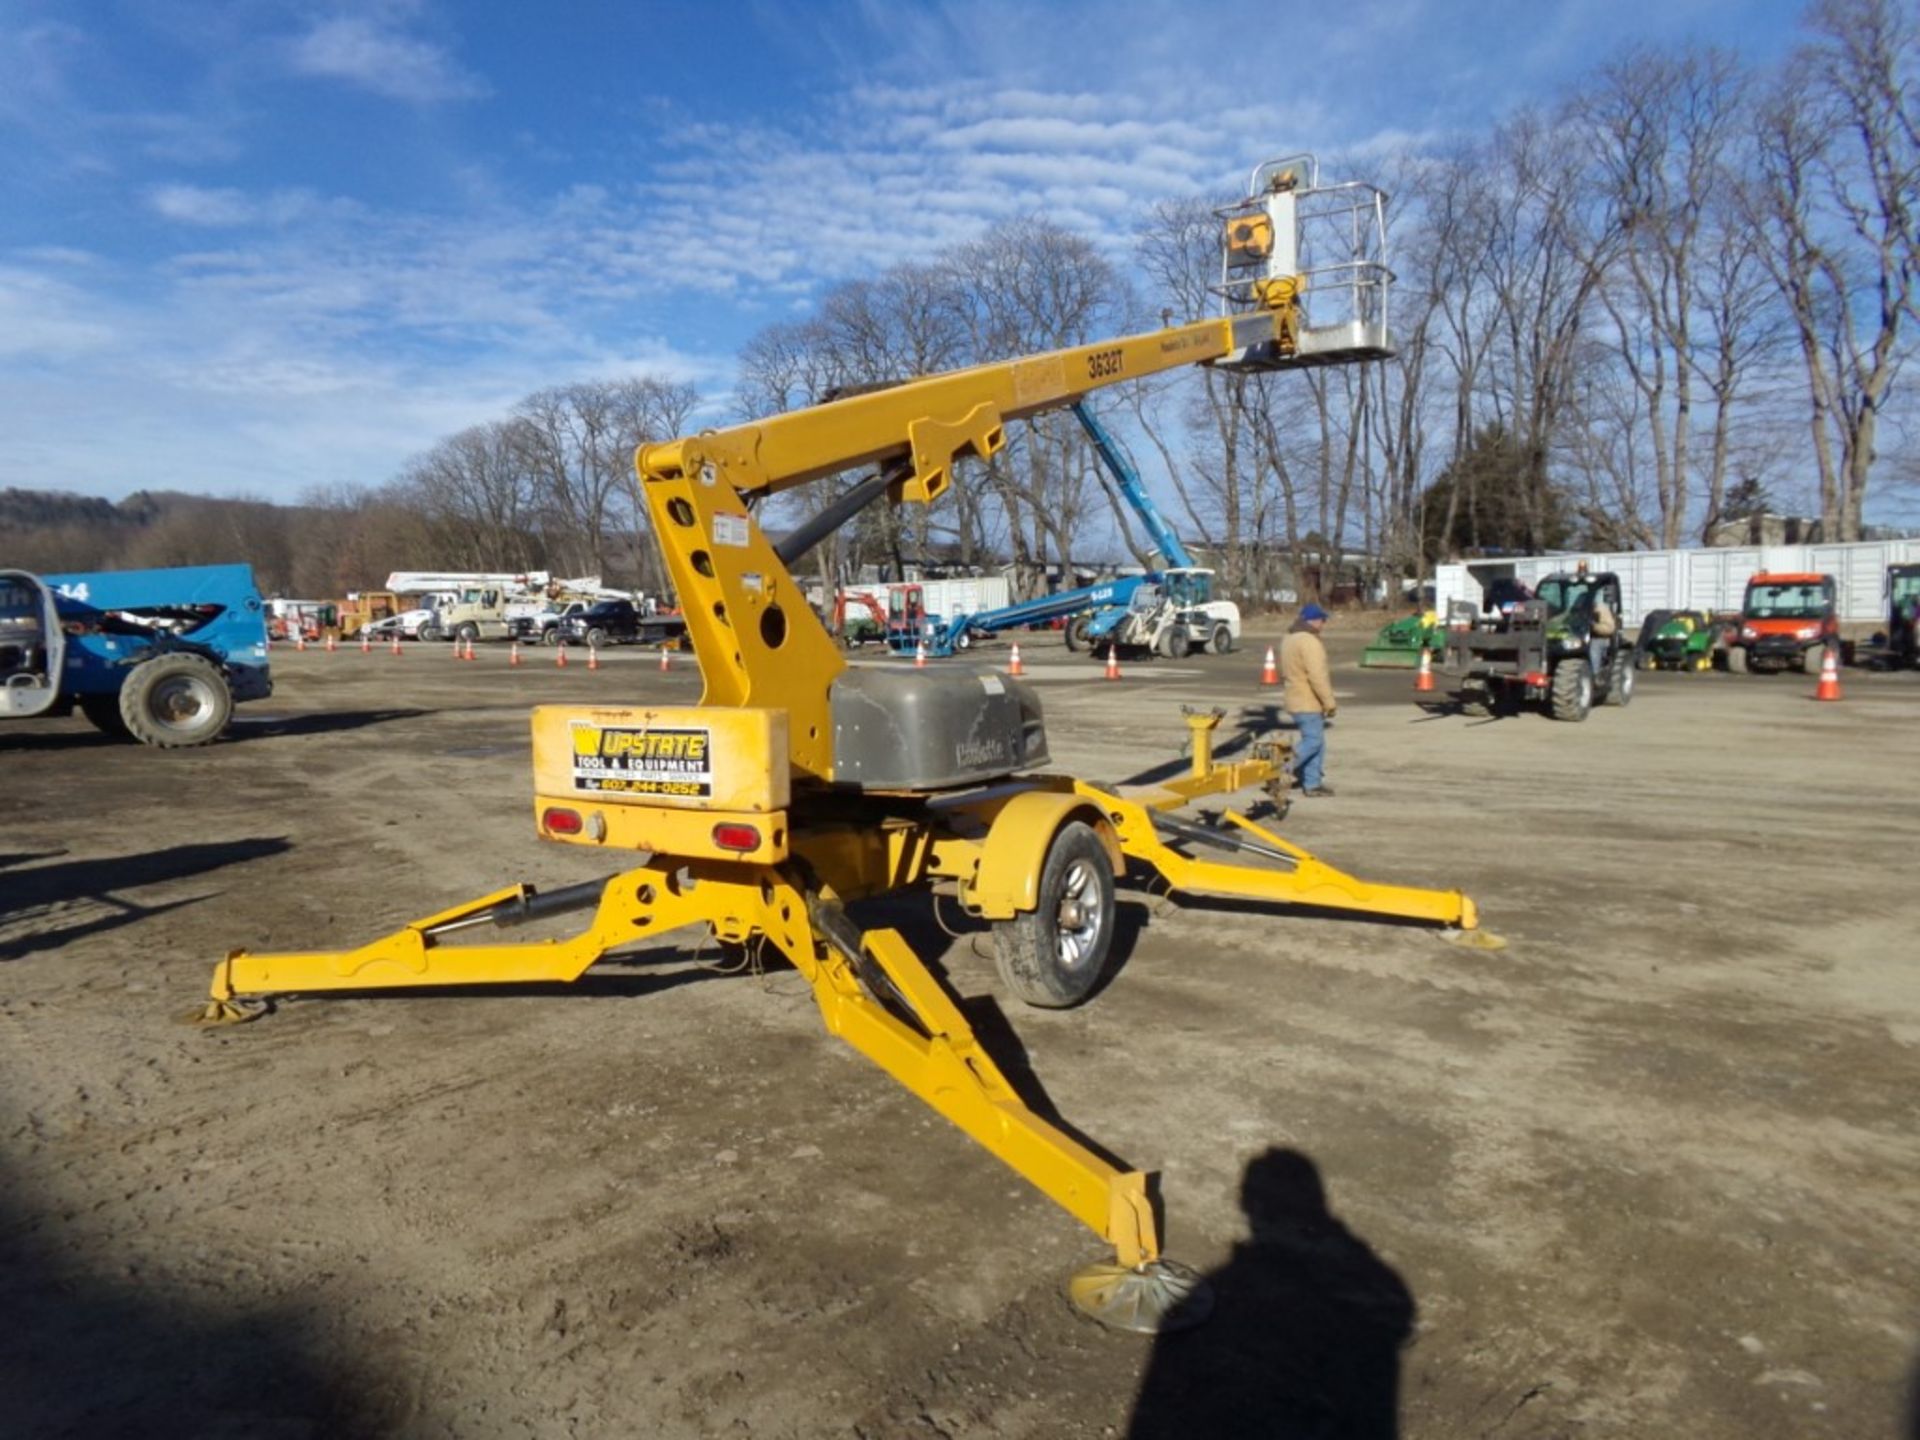 2013 Haulotte Bil Jax 3632T, Tow-Behind Boom Lift, Electric, Works But Batteries Don't Last Long, - Image 2 of 5